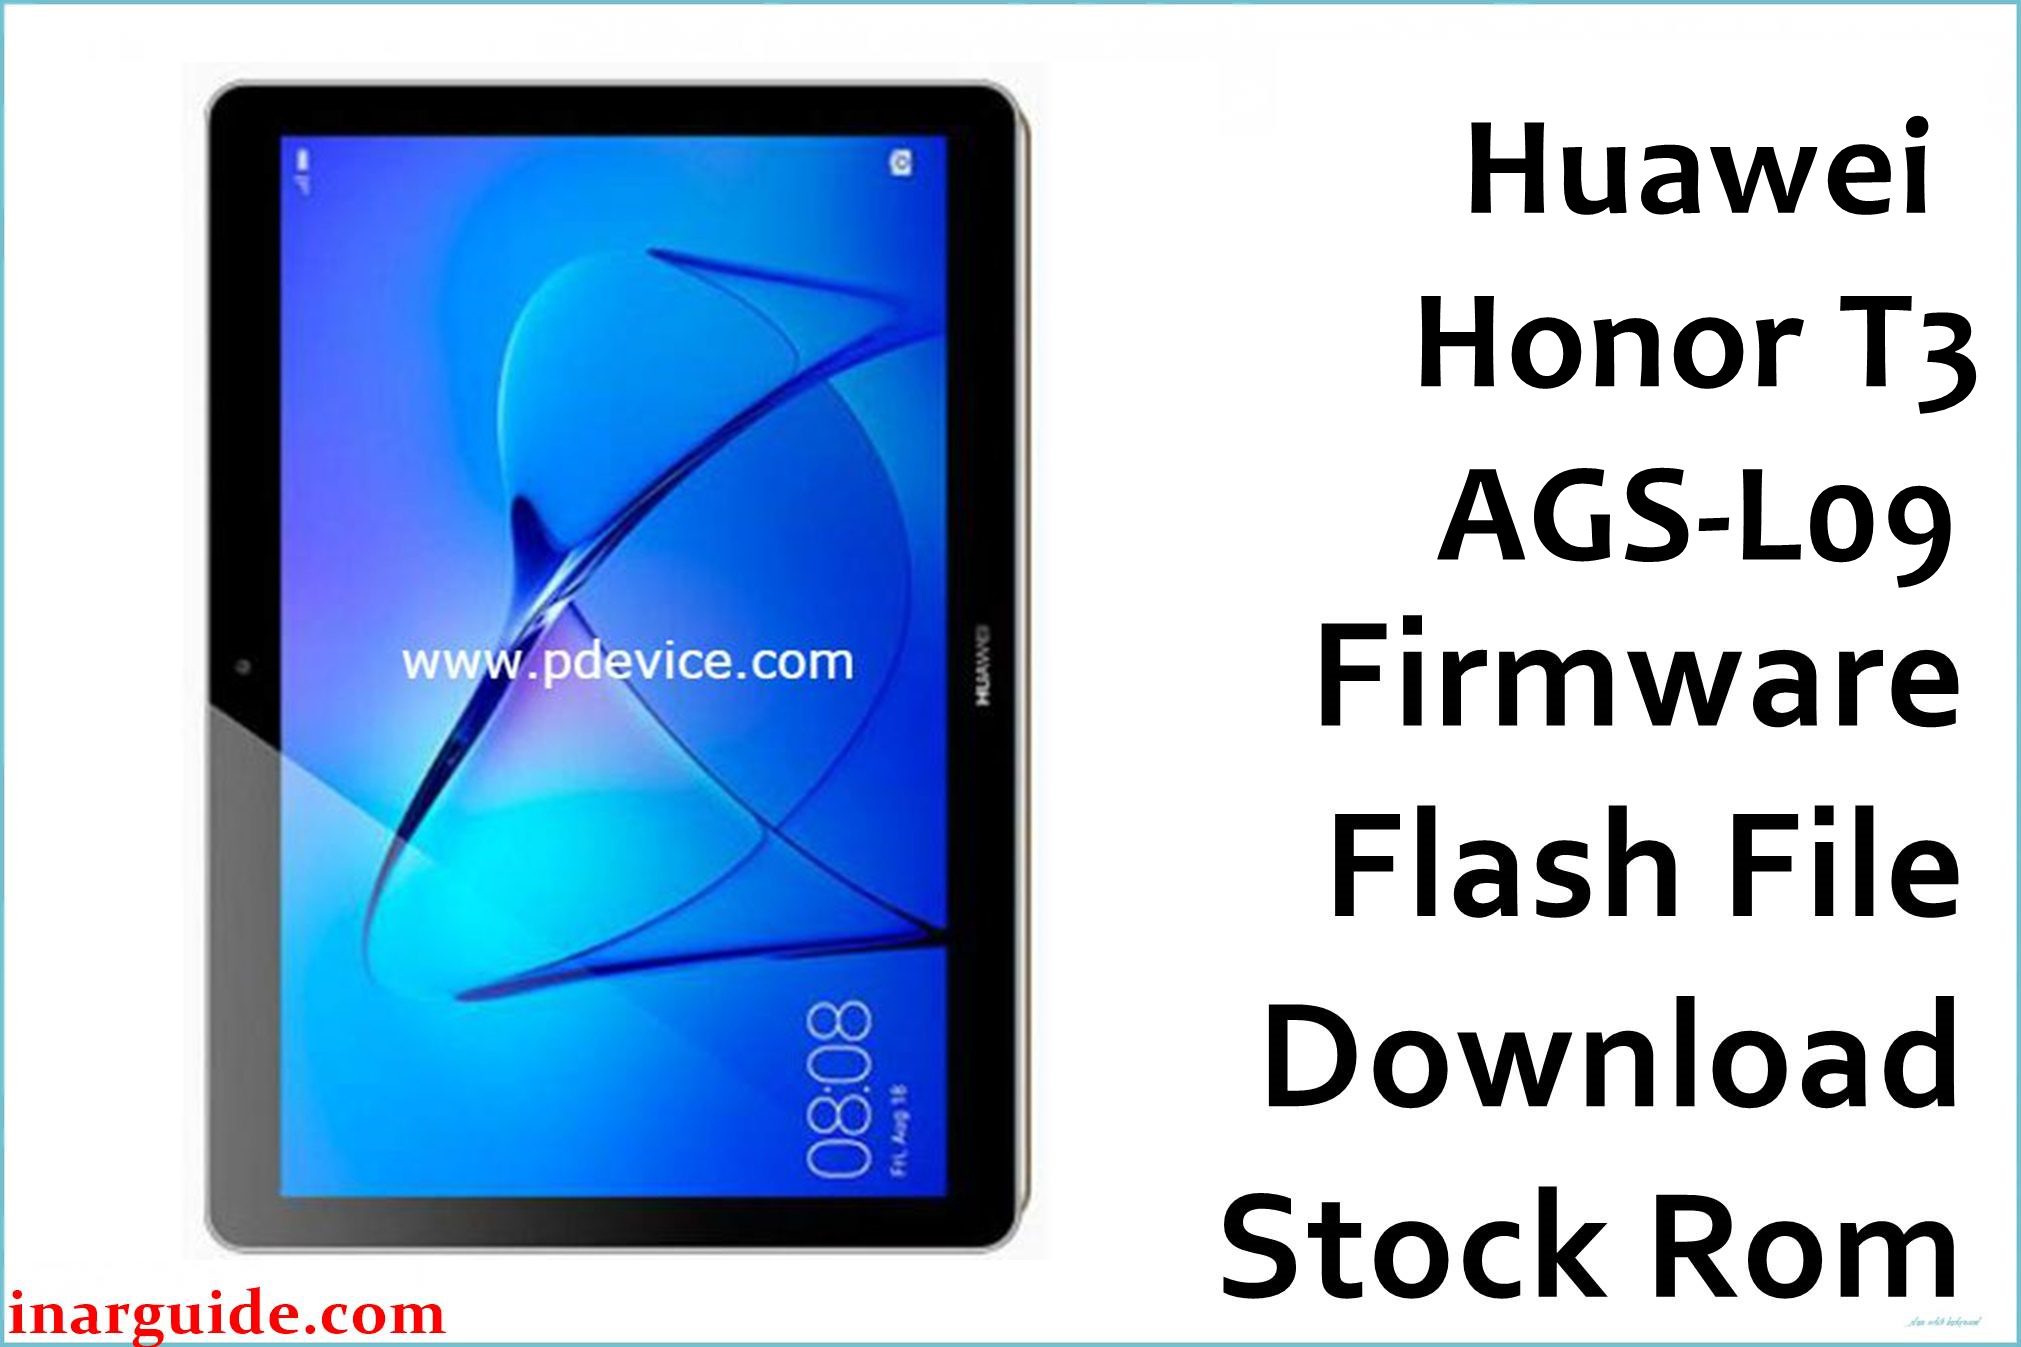 Huawei Honor T3 AGS L09